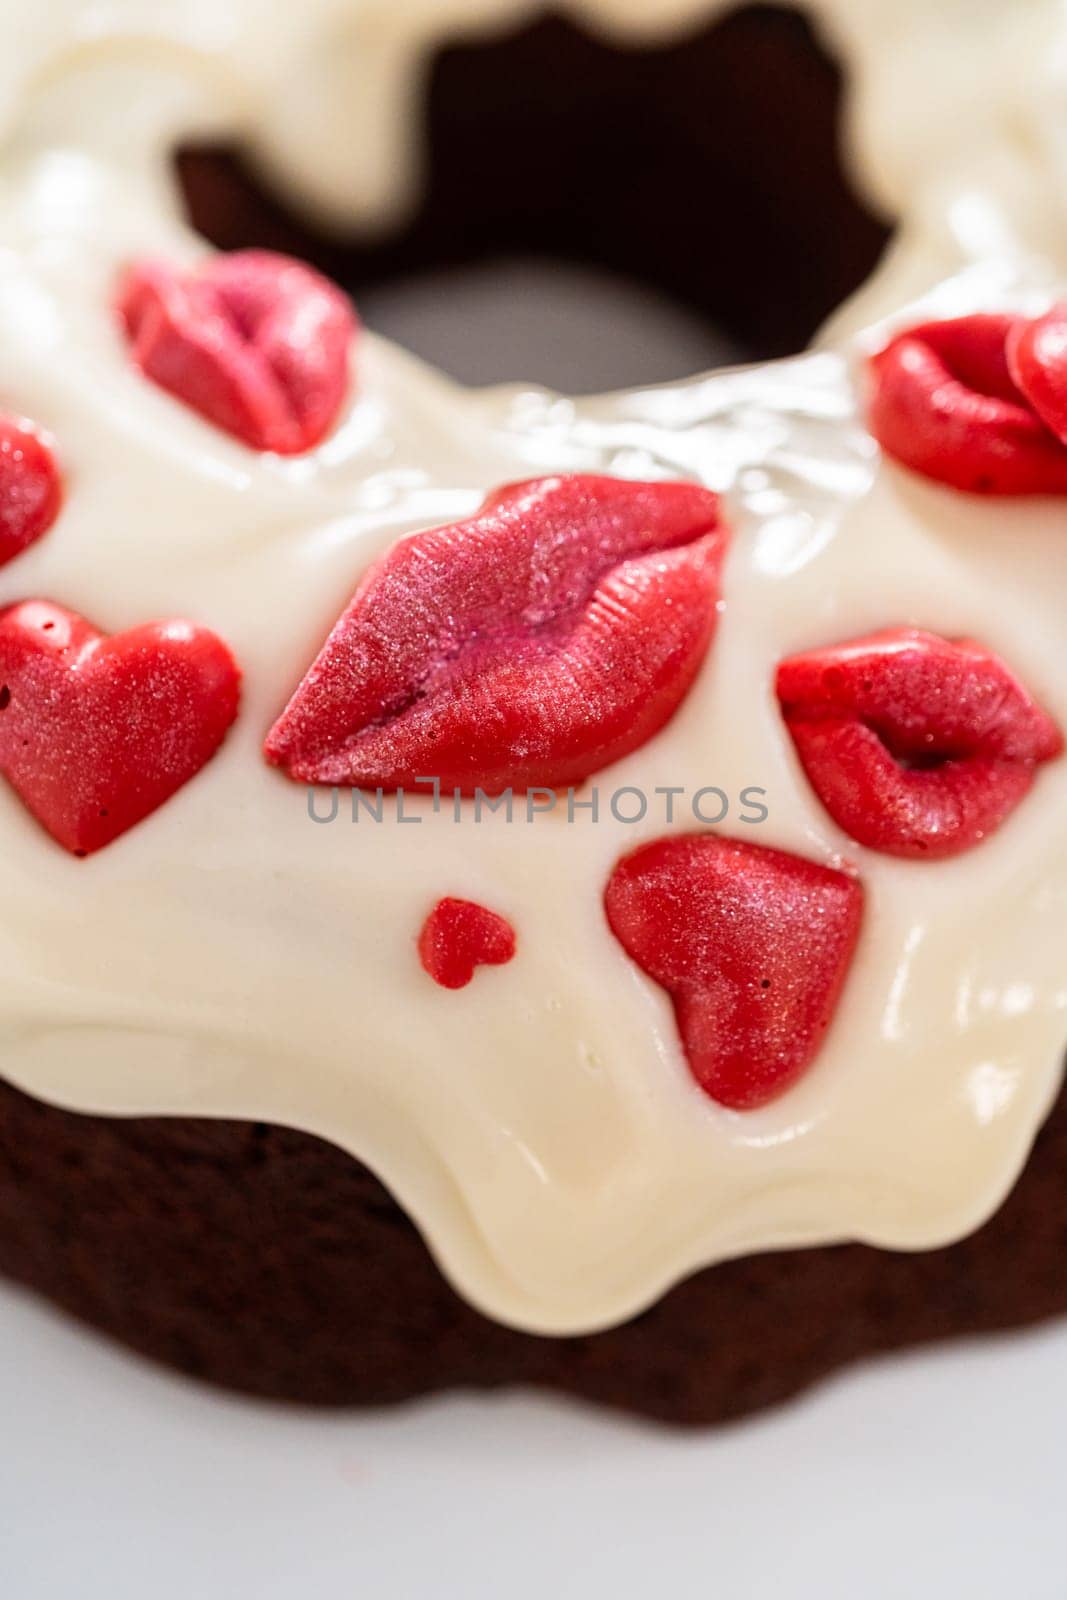 Freshly baked red velvet bundt cake with chocolate lips and hearts over cream cheese glaze for Valentine's Day.